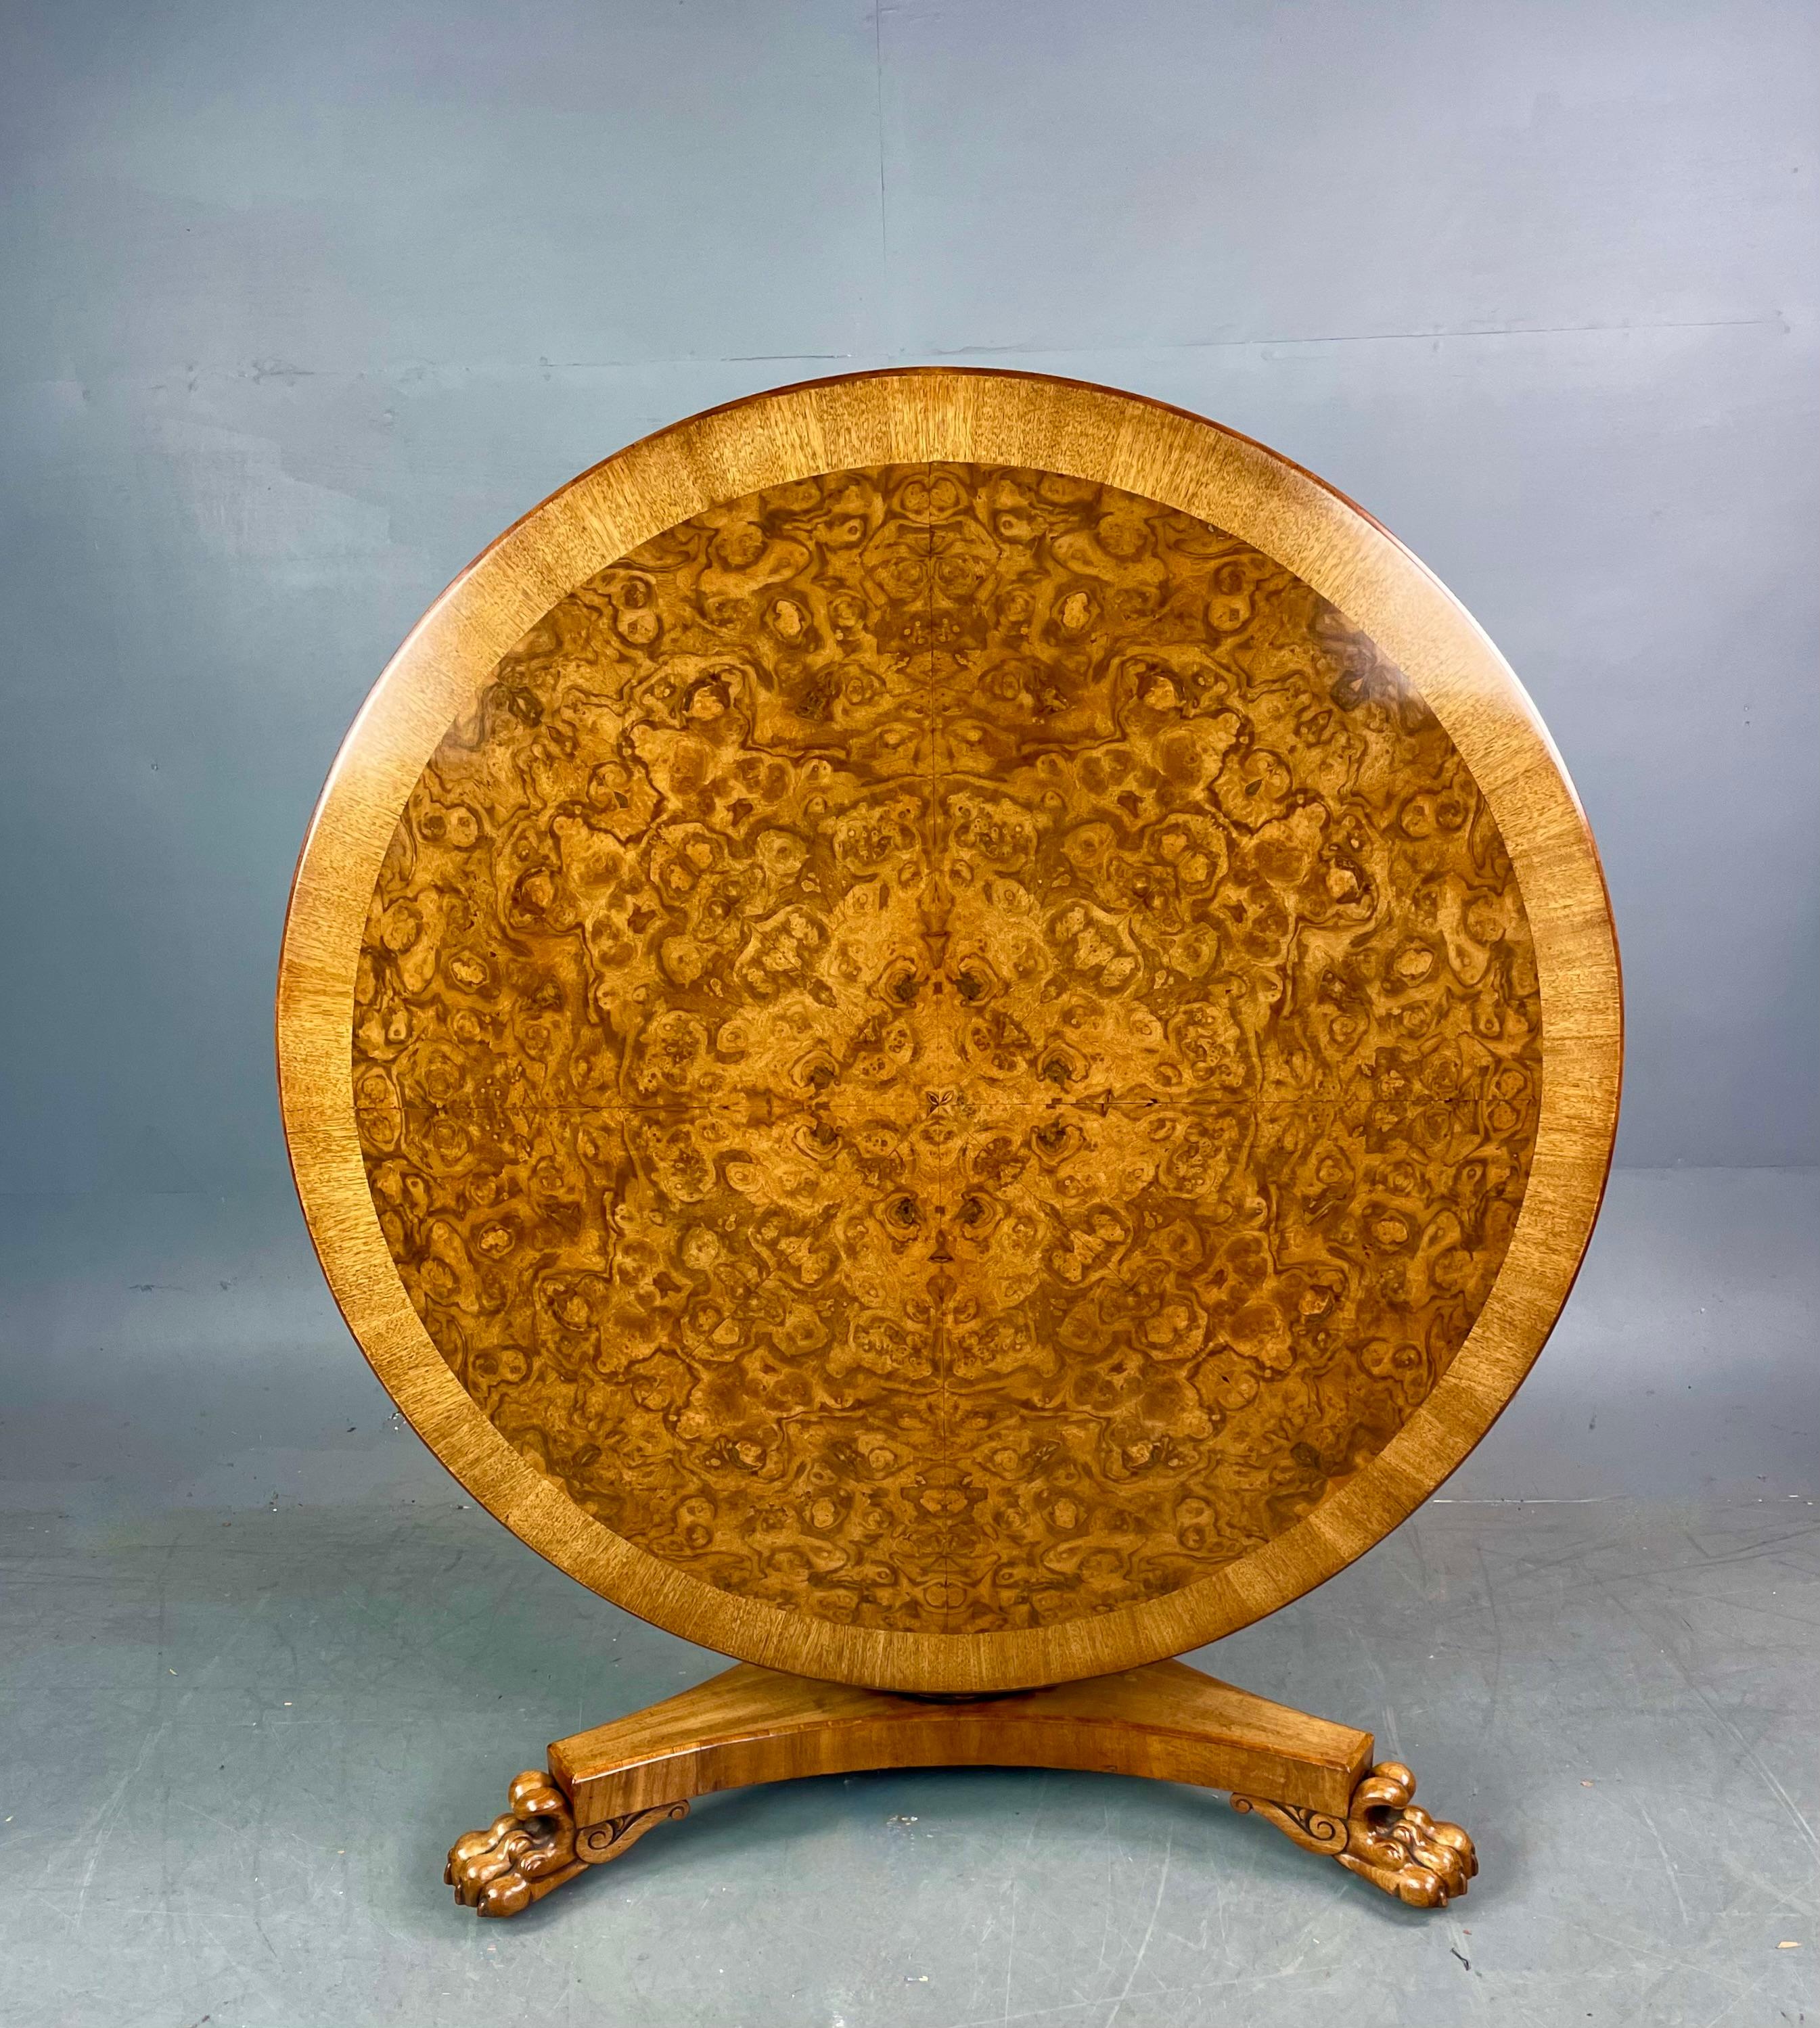 Fine quality regency circular center /dining table circa 1820 .
The table has a fantastic figured walnut top with walnut cross banding ,it is a fantastic colour and in great un marked condition .That will seat six comfortably being 131 cm diameter